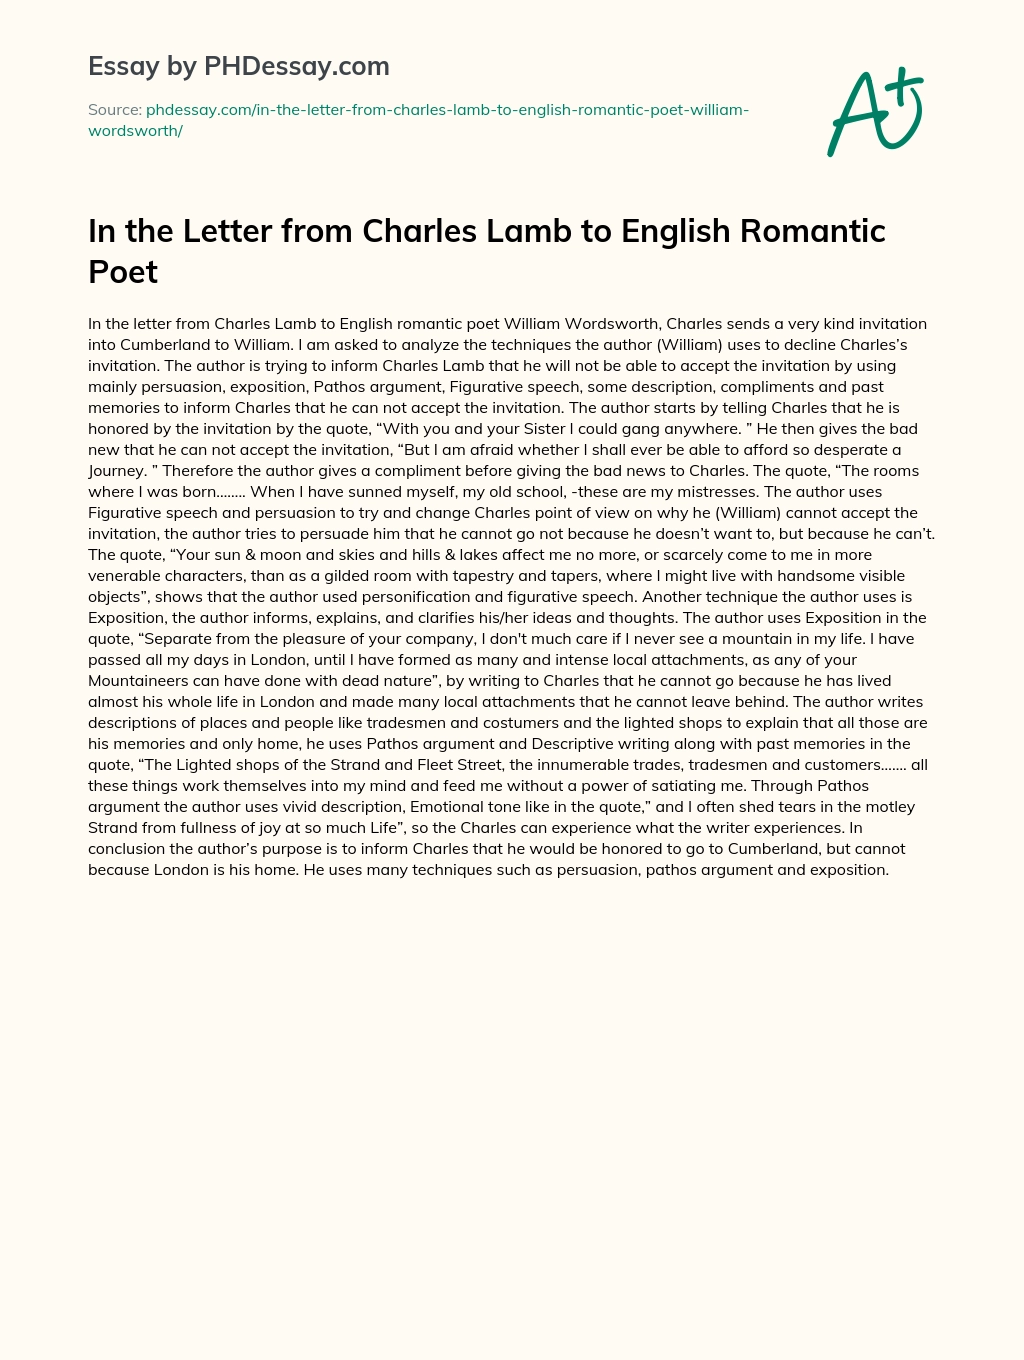 In the Letter from Charles Lamb to English Romantic Poet essay